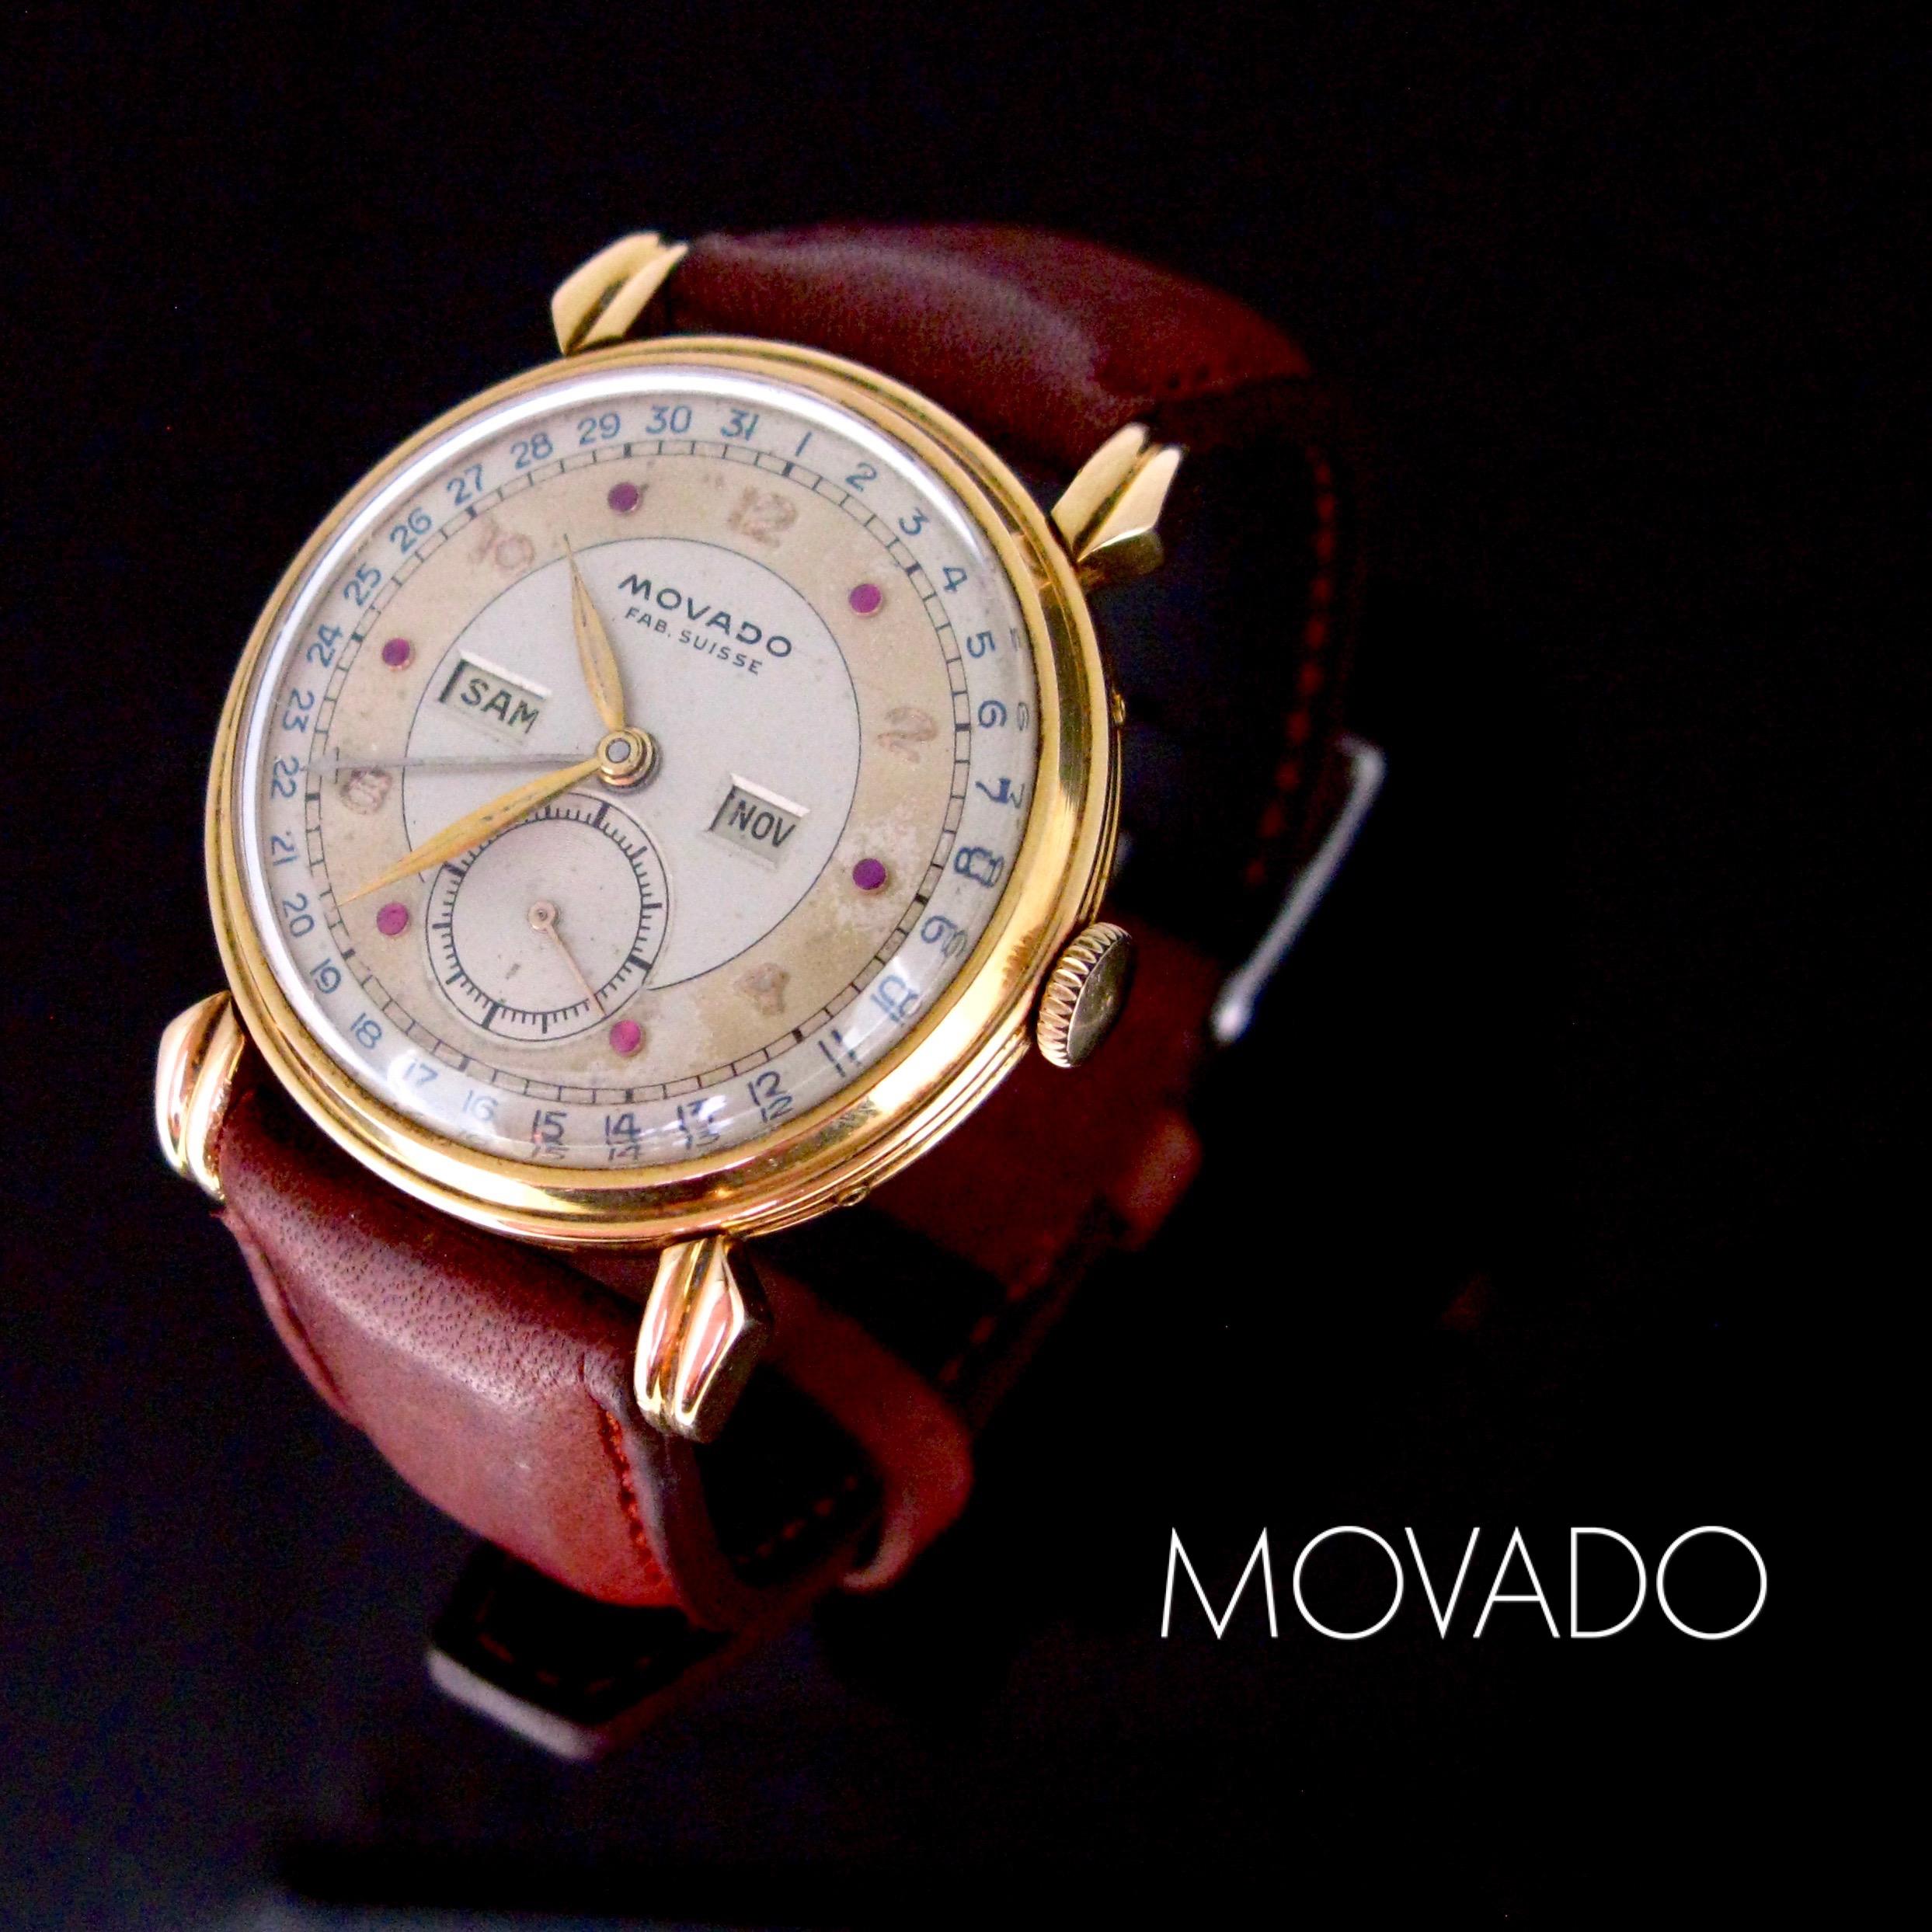 This vintage Movado Triple Calendar Date watch from the 40's is a very scarce model with six rubies set on the dial. It's made in 18K gold (rose/yellow) and is in very good condition for its age.

Total Weight:	48.7 g

Metal:		18K yellow/rose gold